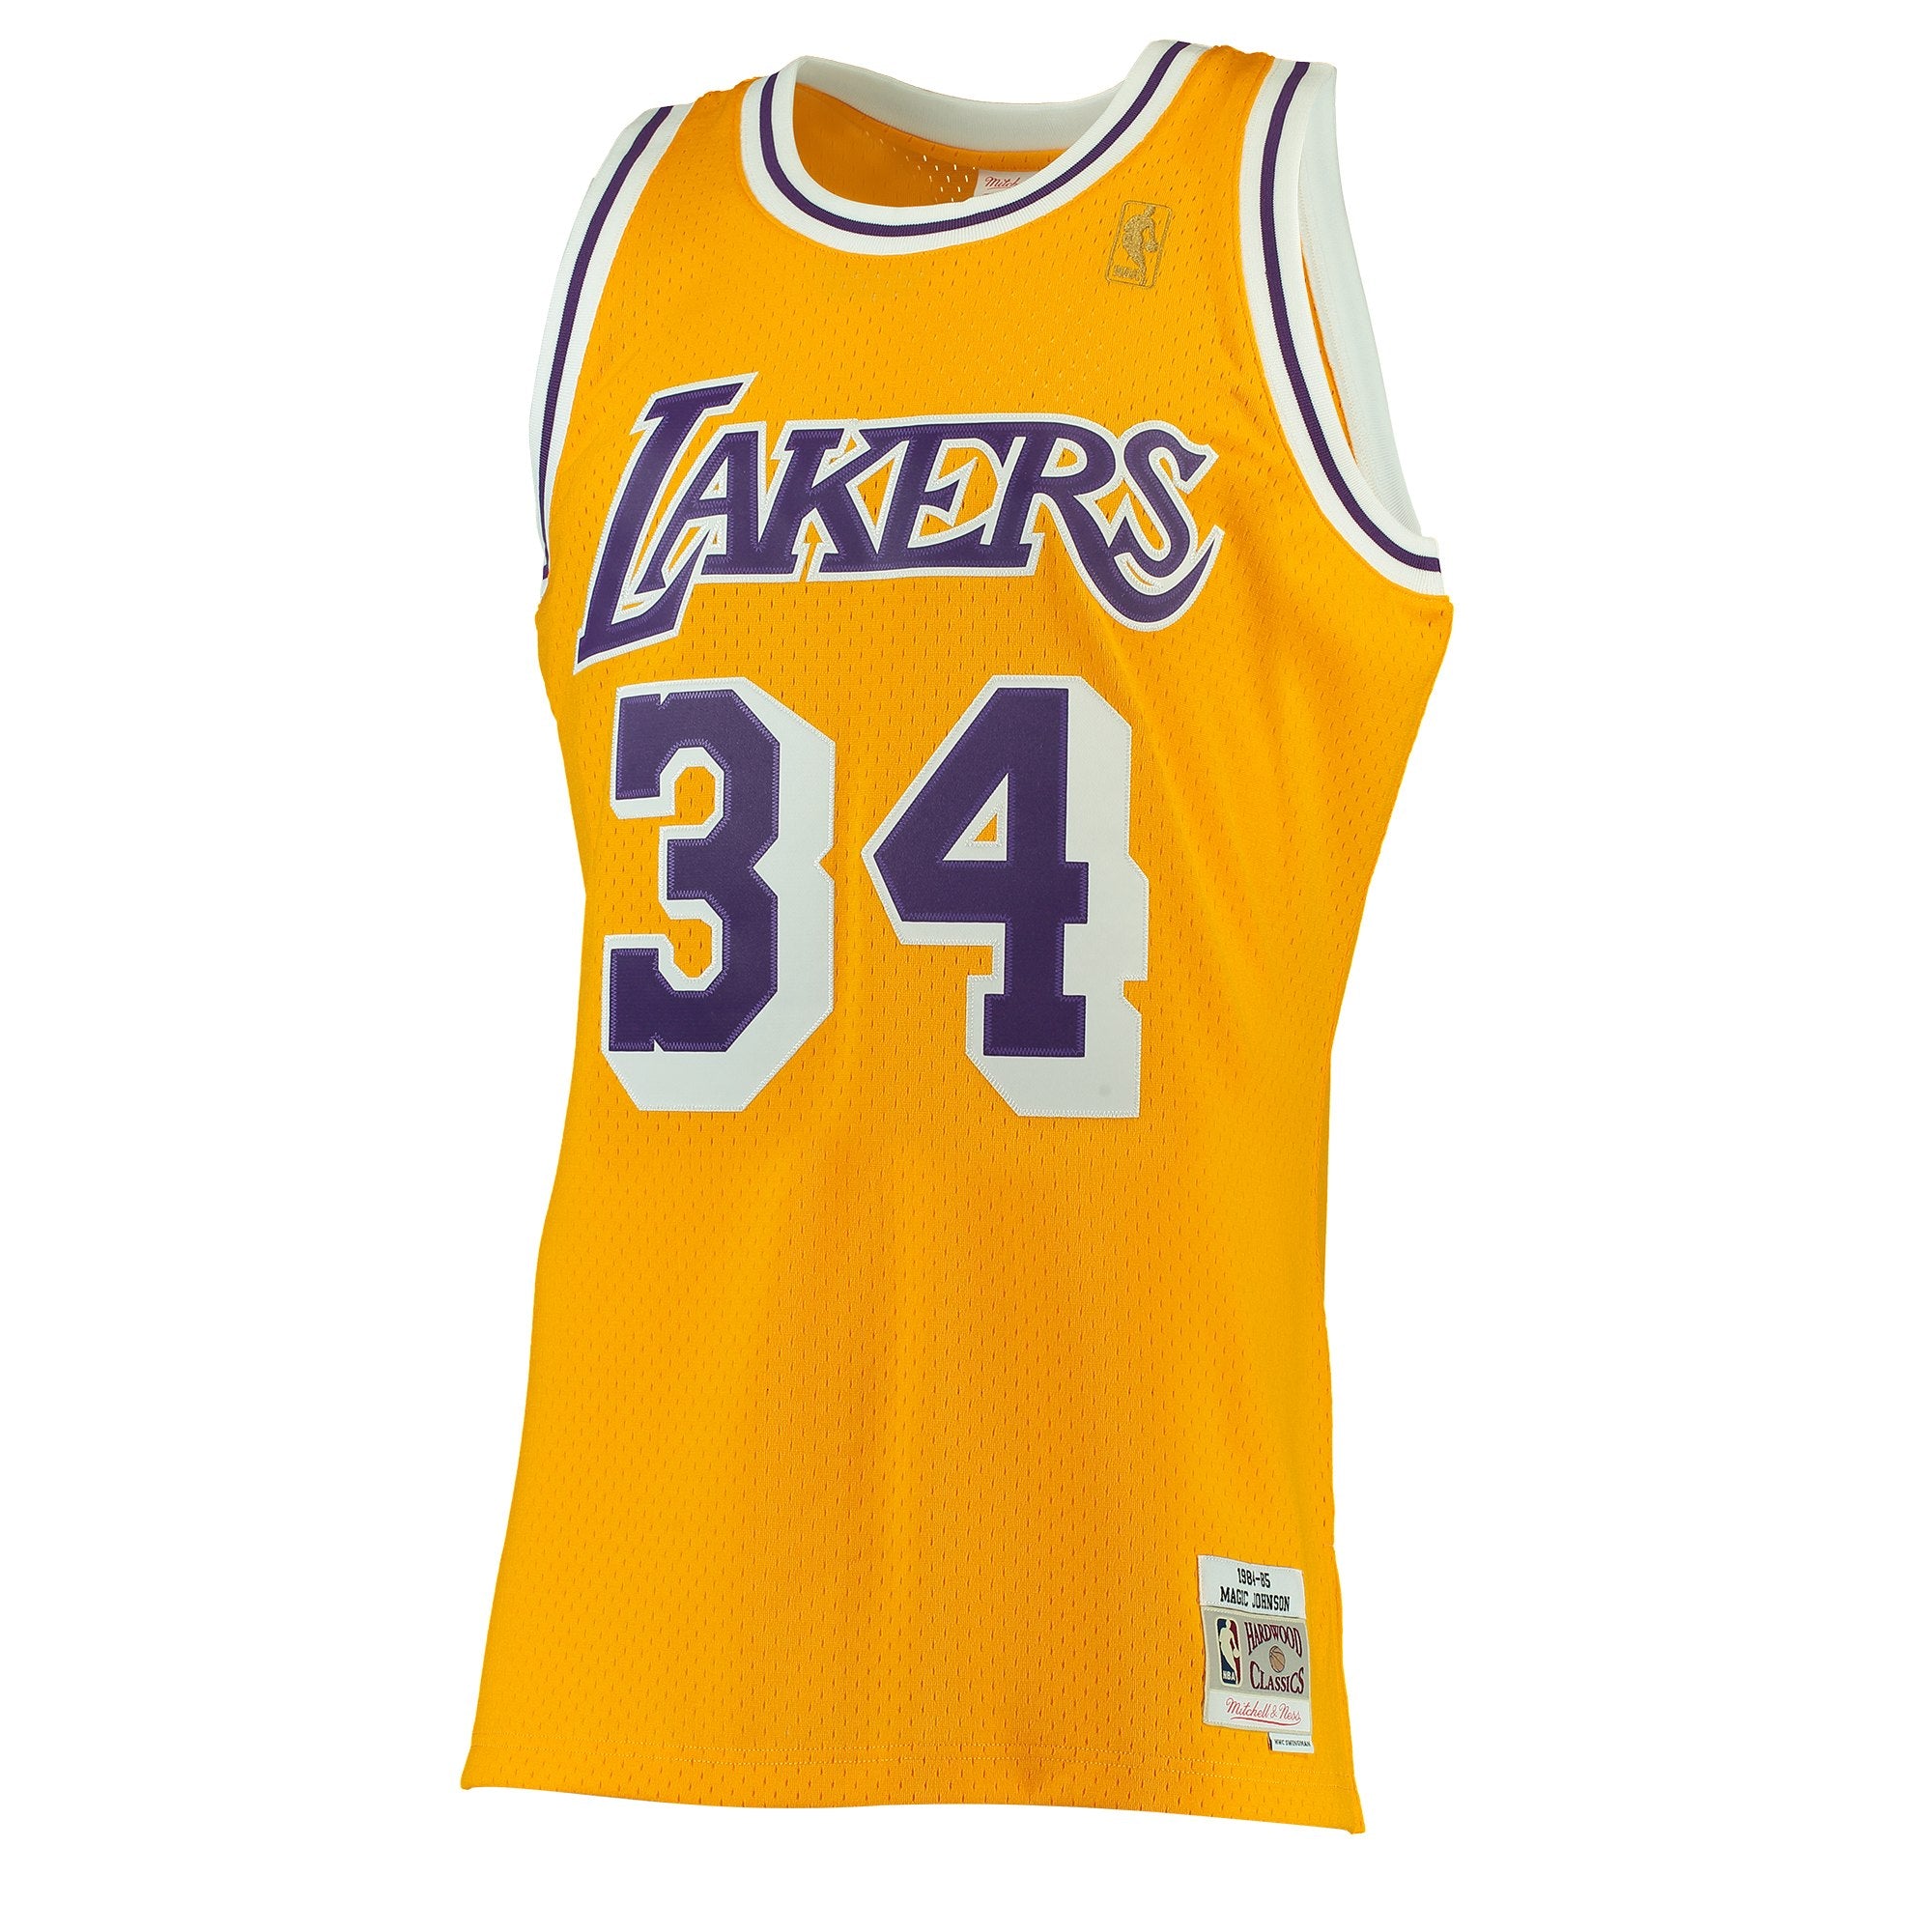 Los Angeles Lakers 1996-97 Shaquille O'Neal Mitchell & Ness Yellow Swingman Jersey